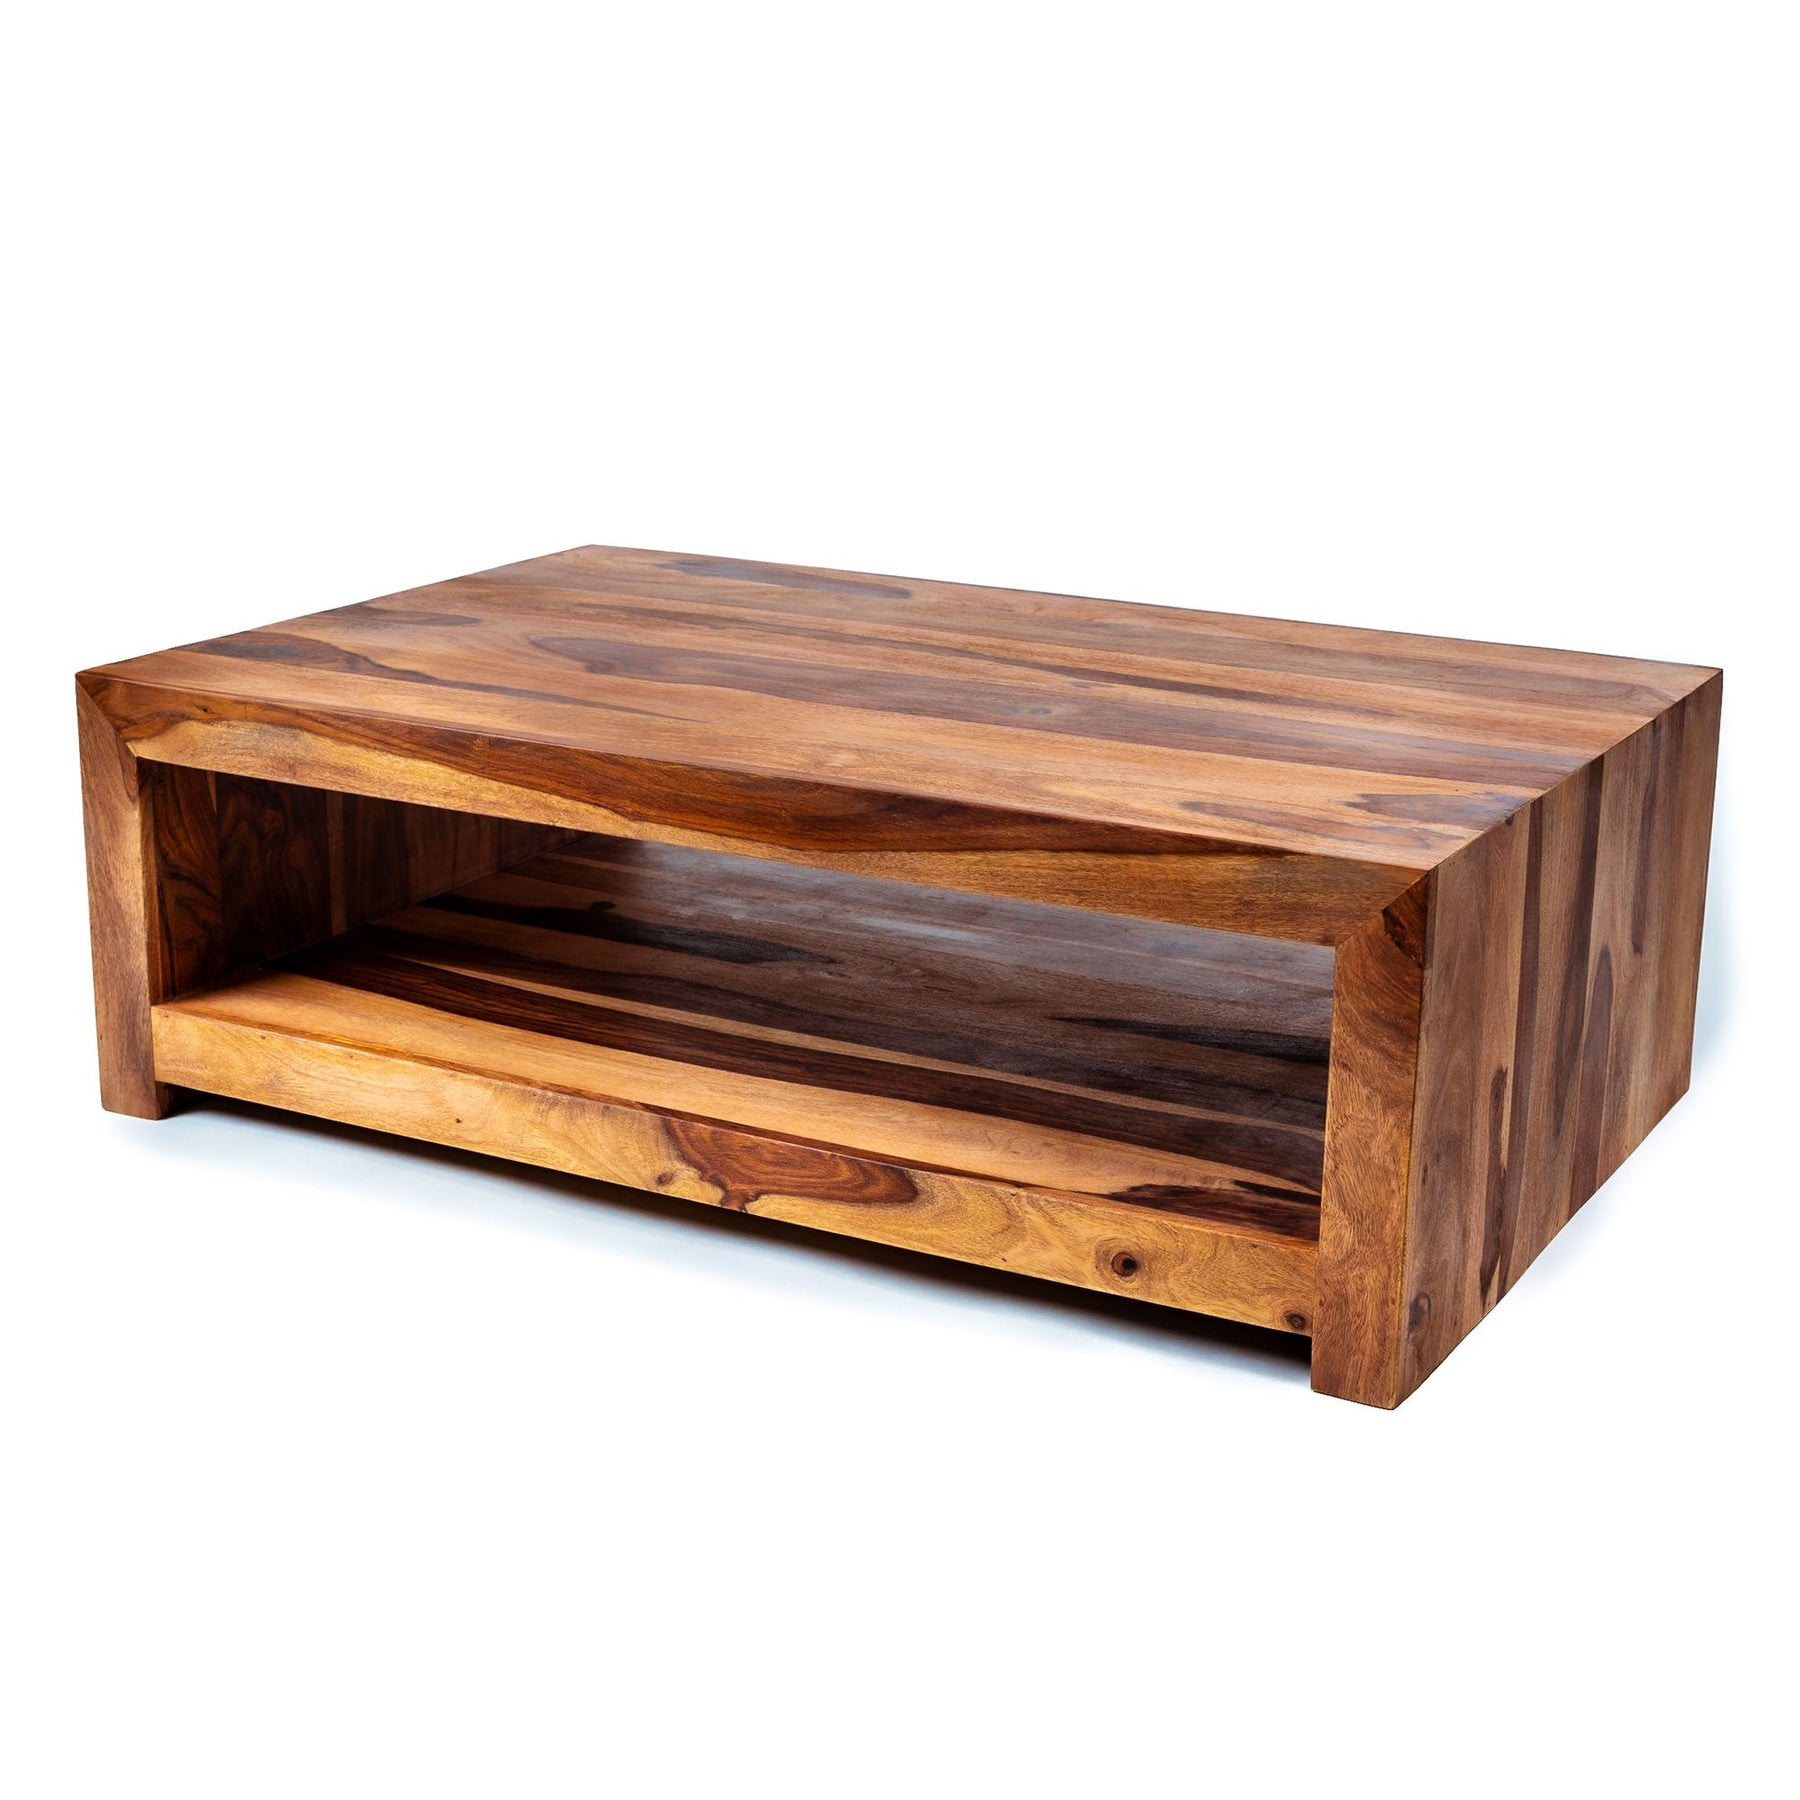 Zen Wooden Coffee Table - 2 Tier Unique Wooden Coffee Table with Storage Shelf | 2 Sizes Available